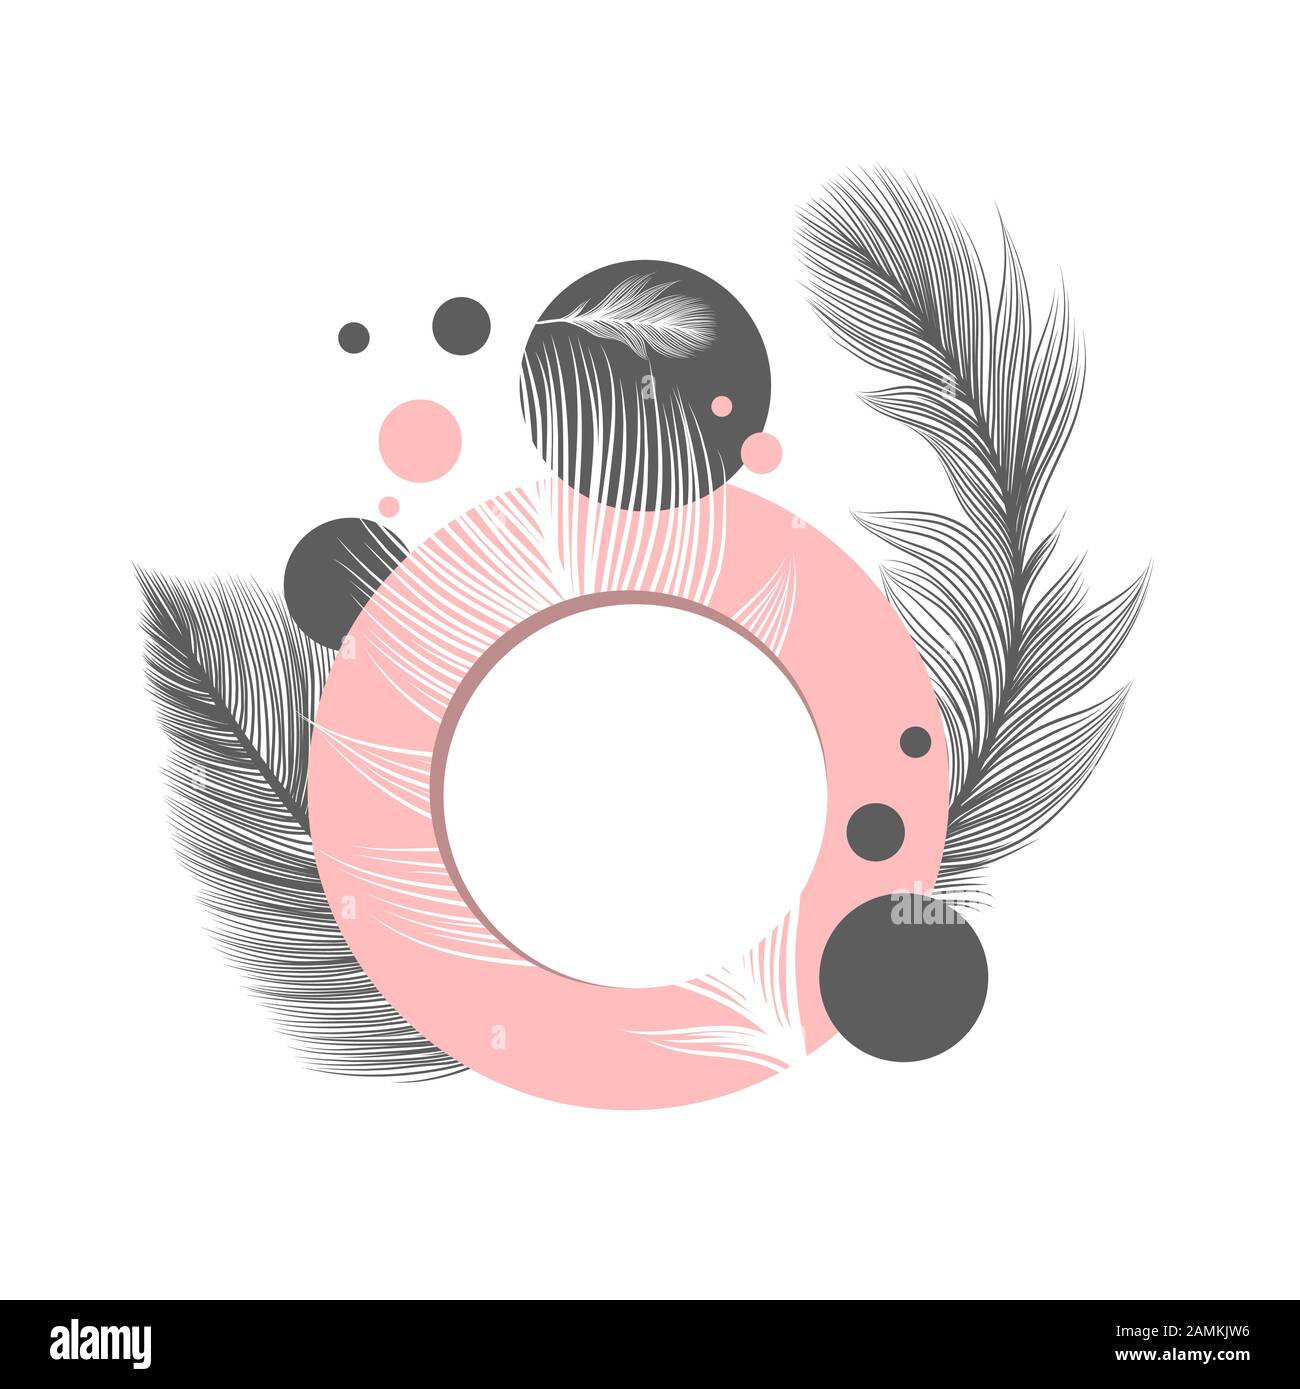 White fluffy feathers on pink circle frame, vector abstract background. Fluffy feathers and plumage quills and dots pattern wedding or birthday decoration modern simple minimal design elements Stock Vector